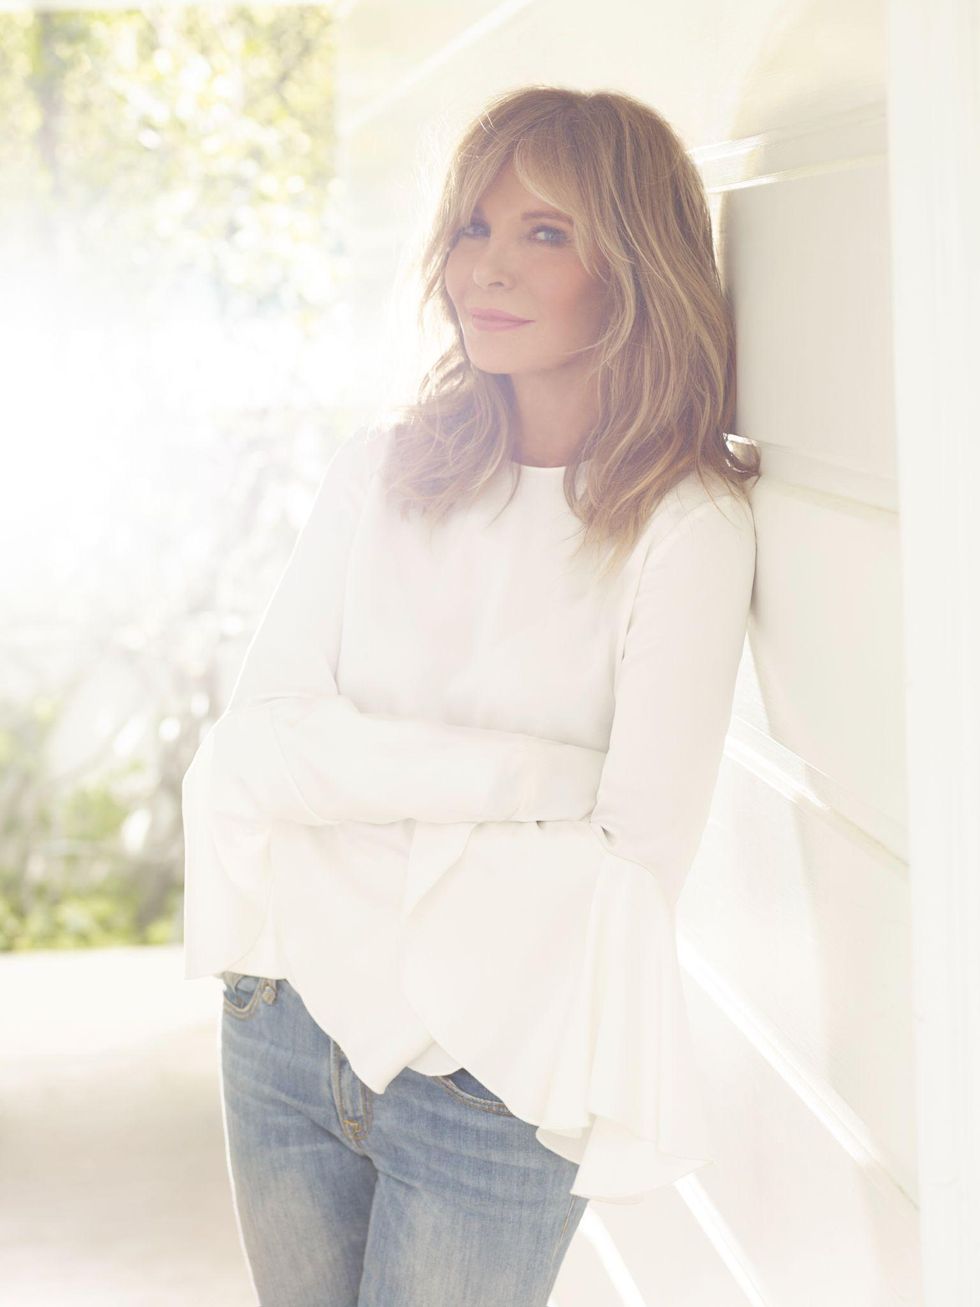 15 Minutes With: Jaclyn Smith Talks to HealthyWoman on the 20th Anniversary of Her Breast Cancer Diagnosis